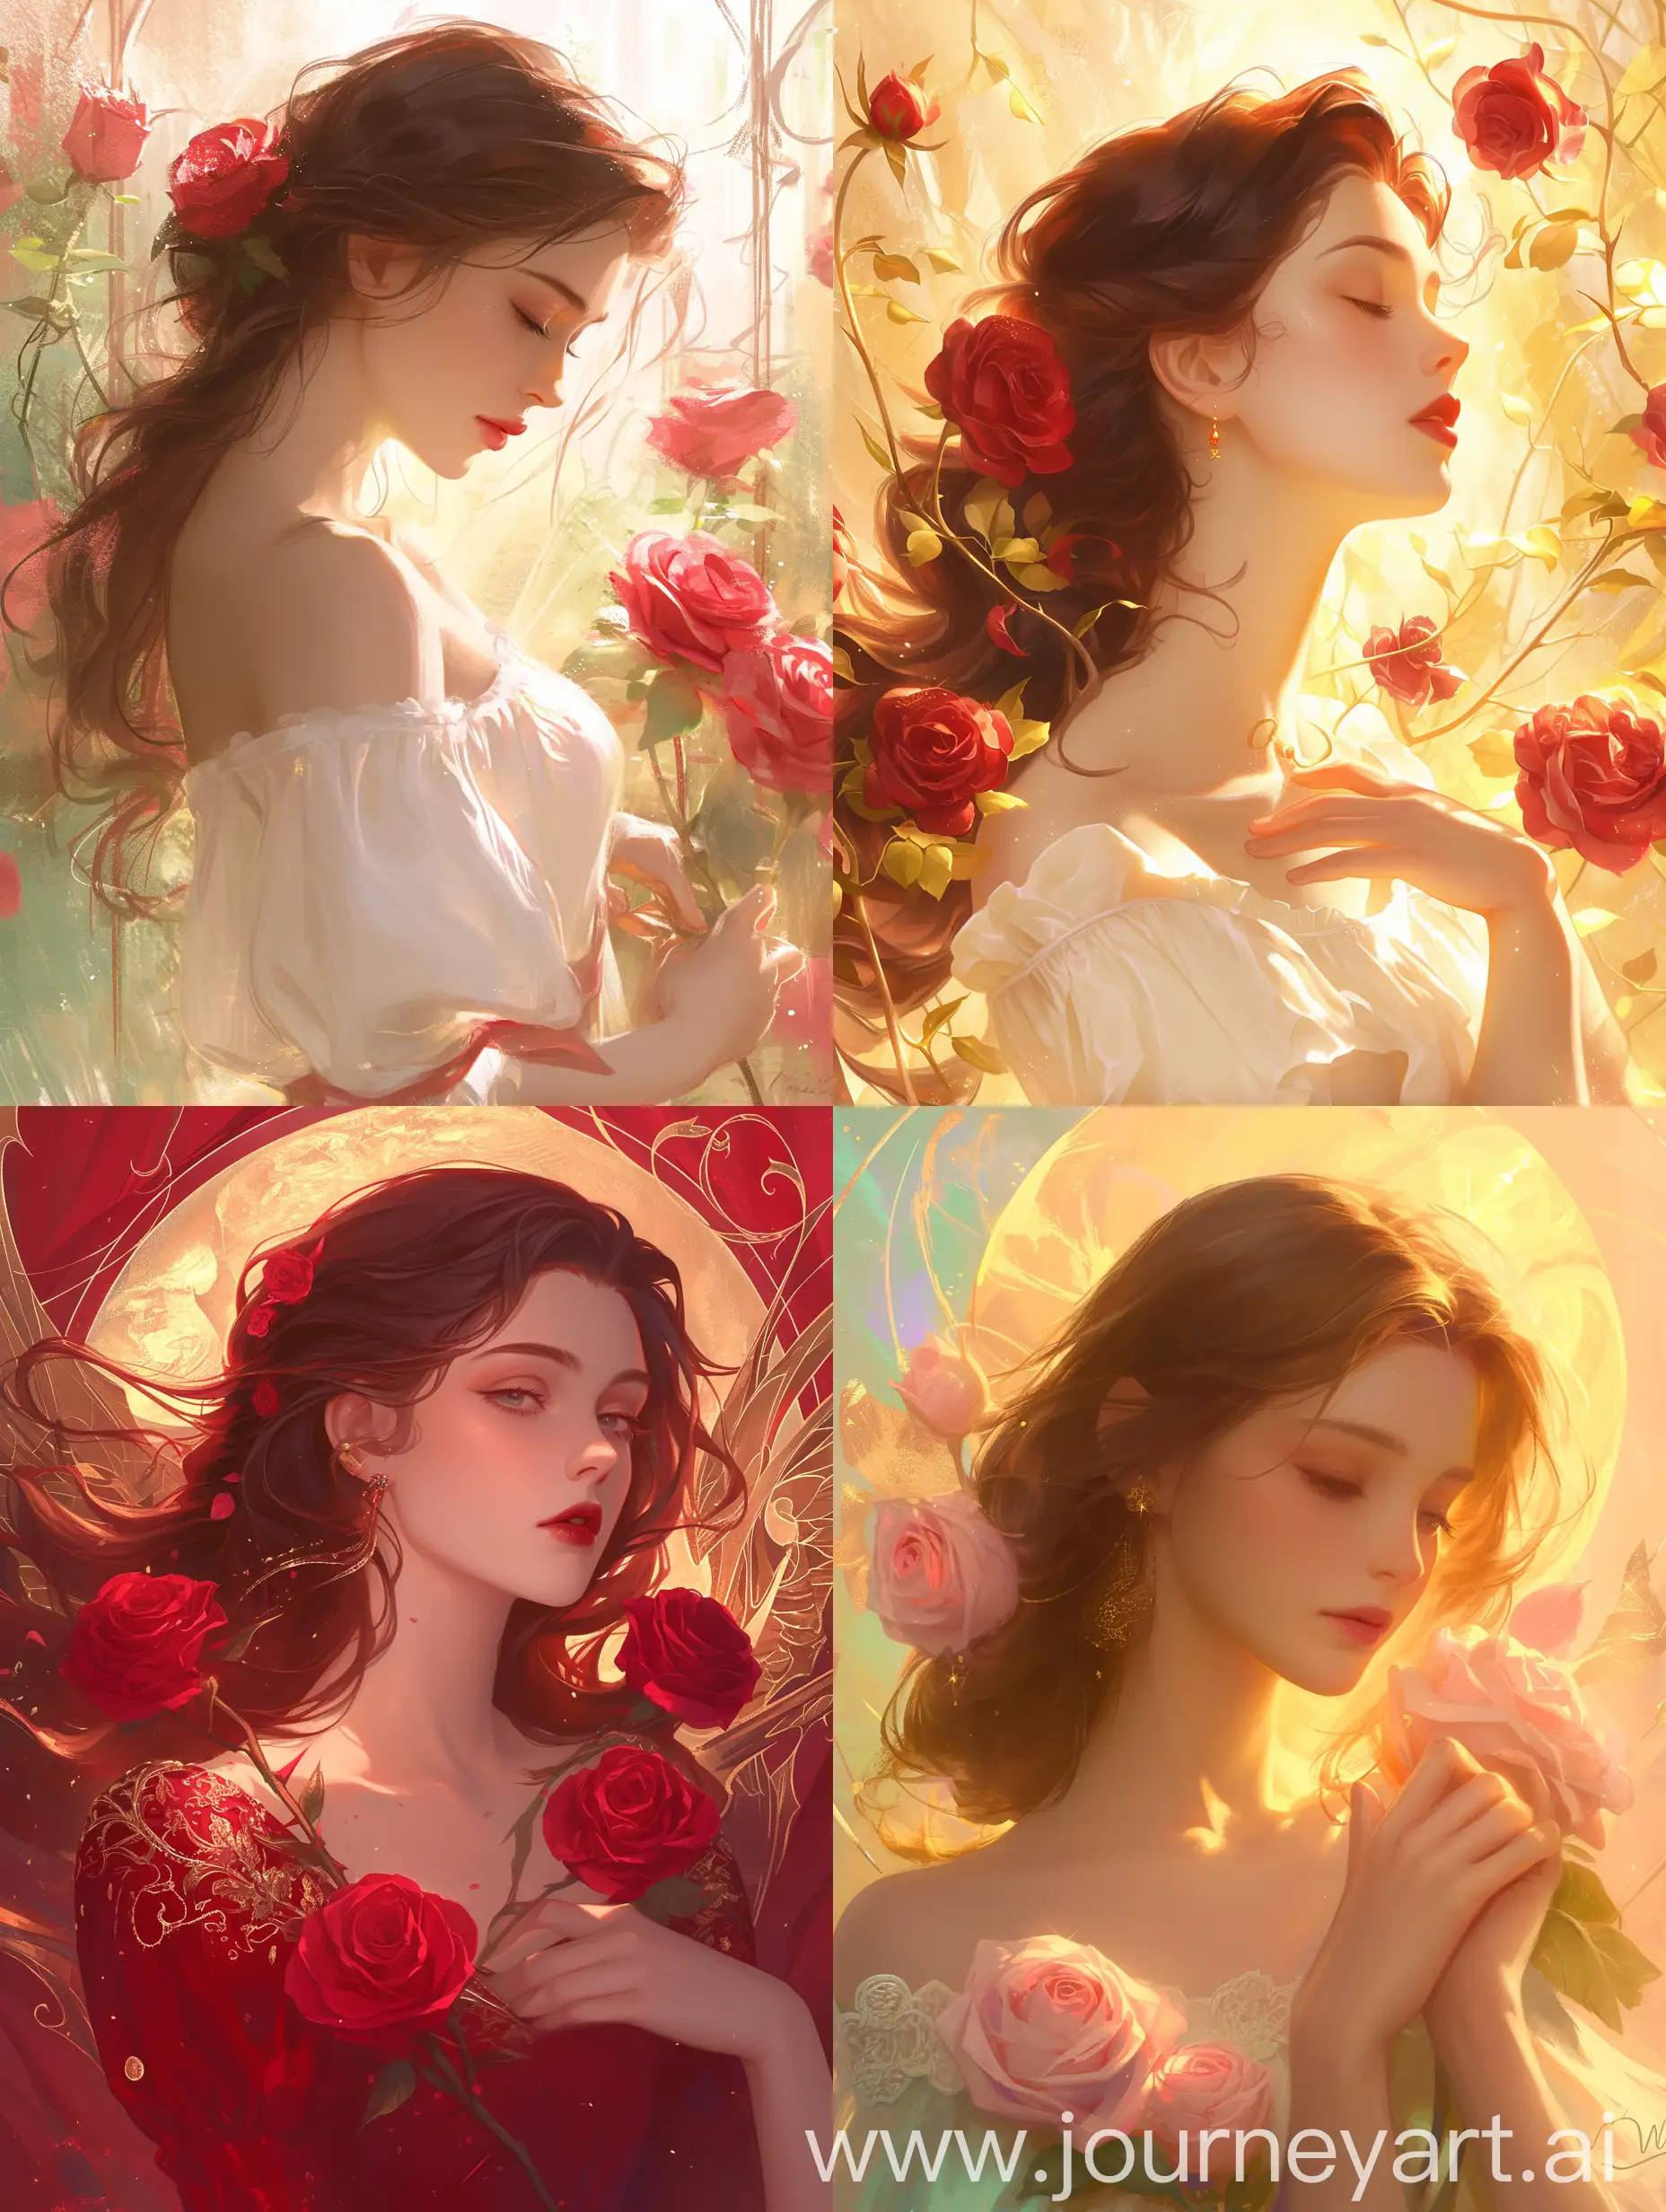 Ethereal-Art-Nouveau-Digital-Portrait-of-a-Woman-with-Roses